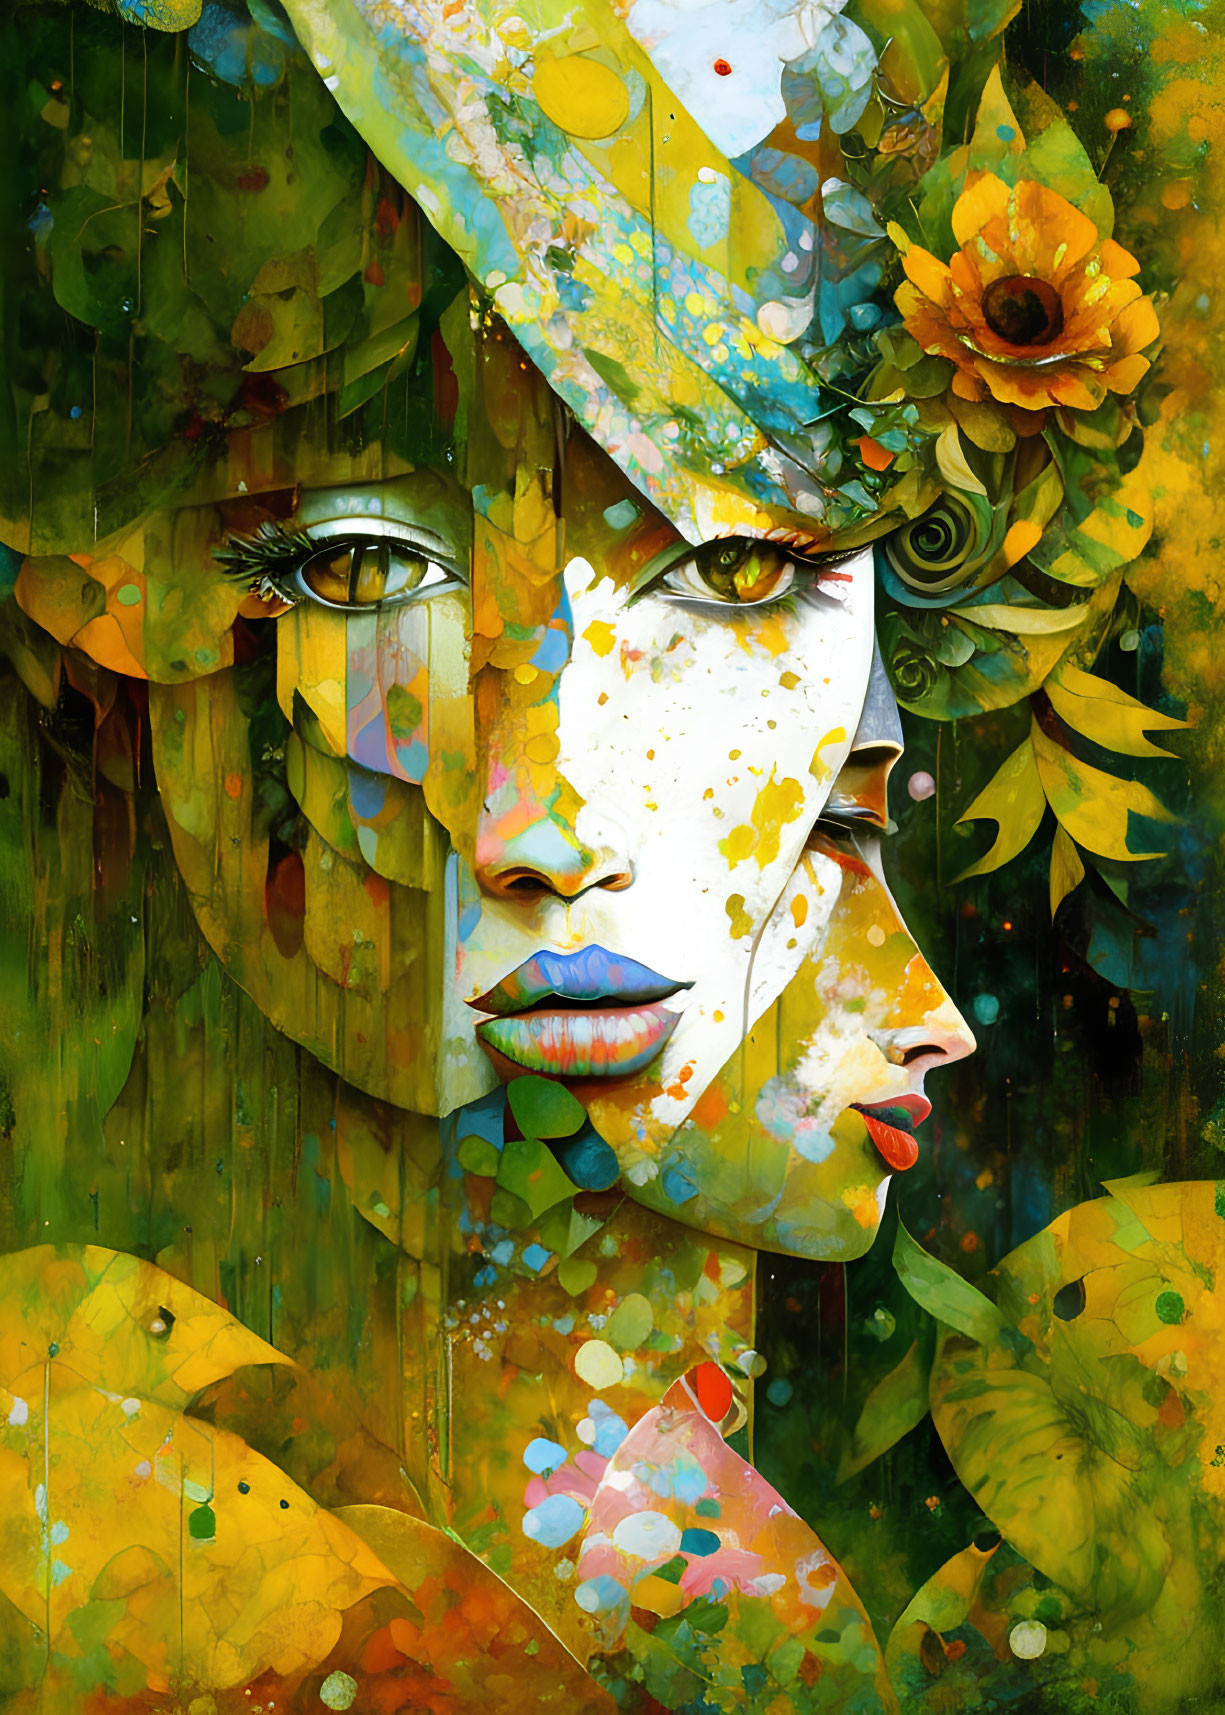 Colorful autumn leaves merge with woman's face in vibrant illustration